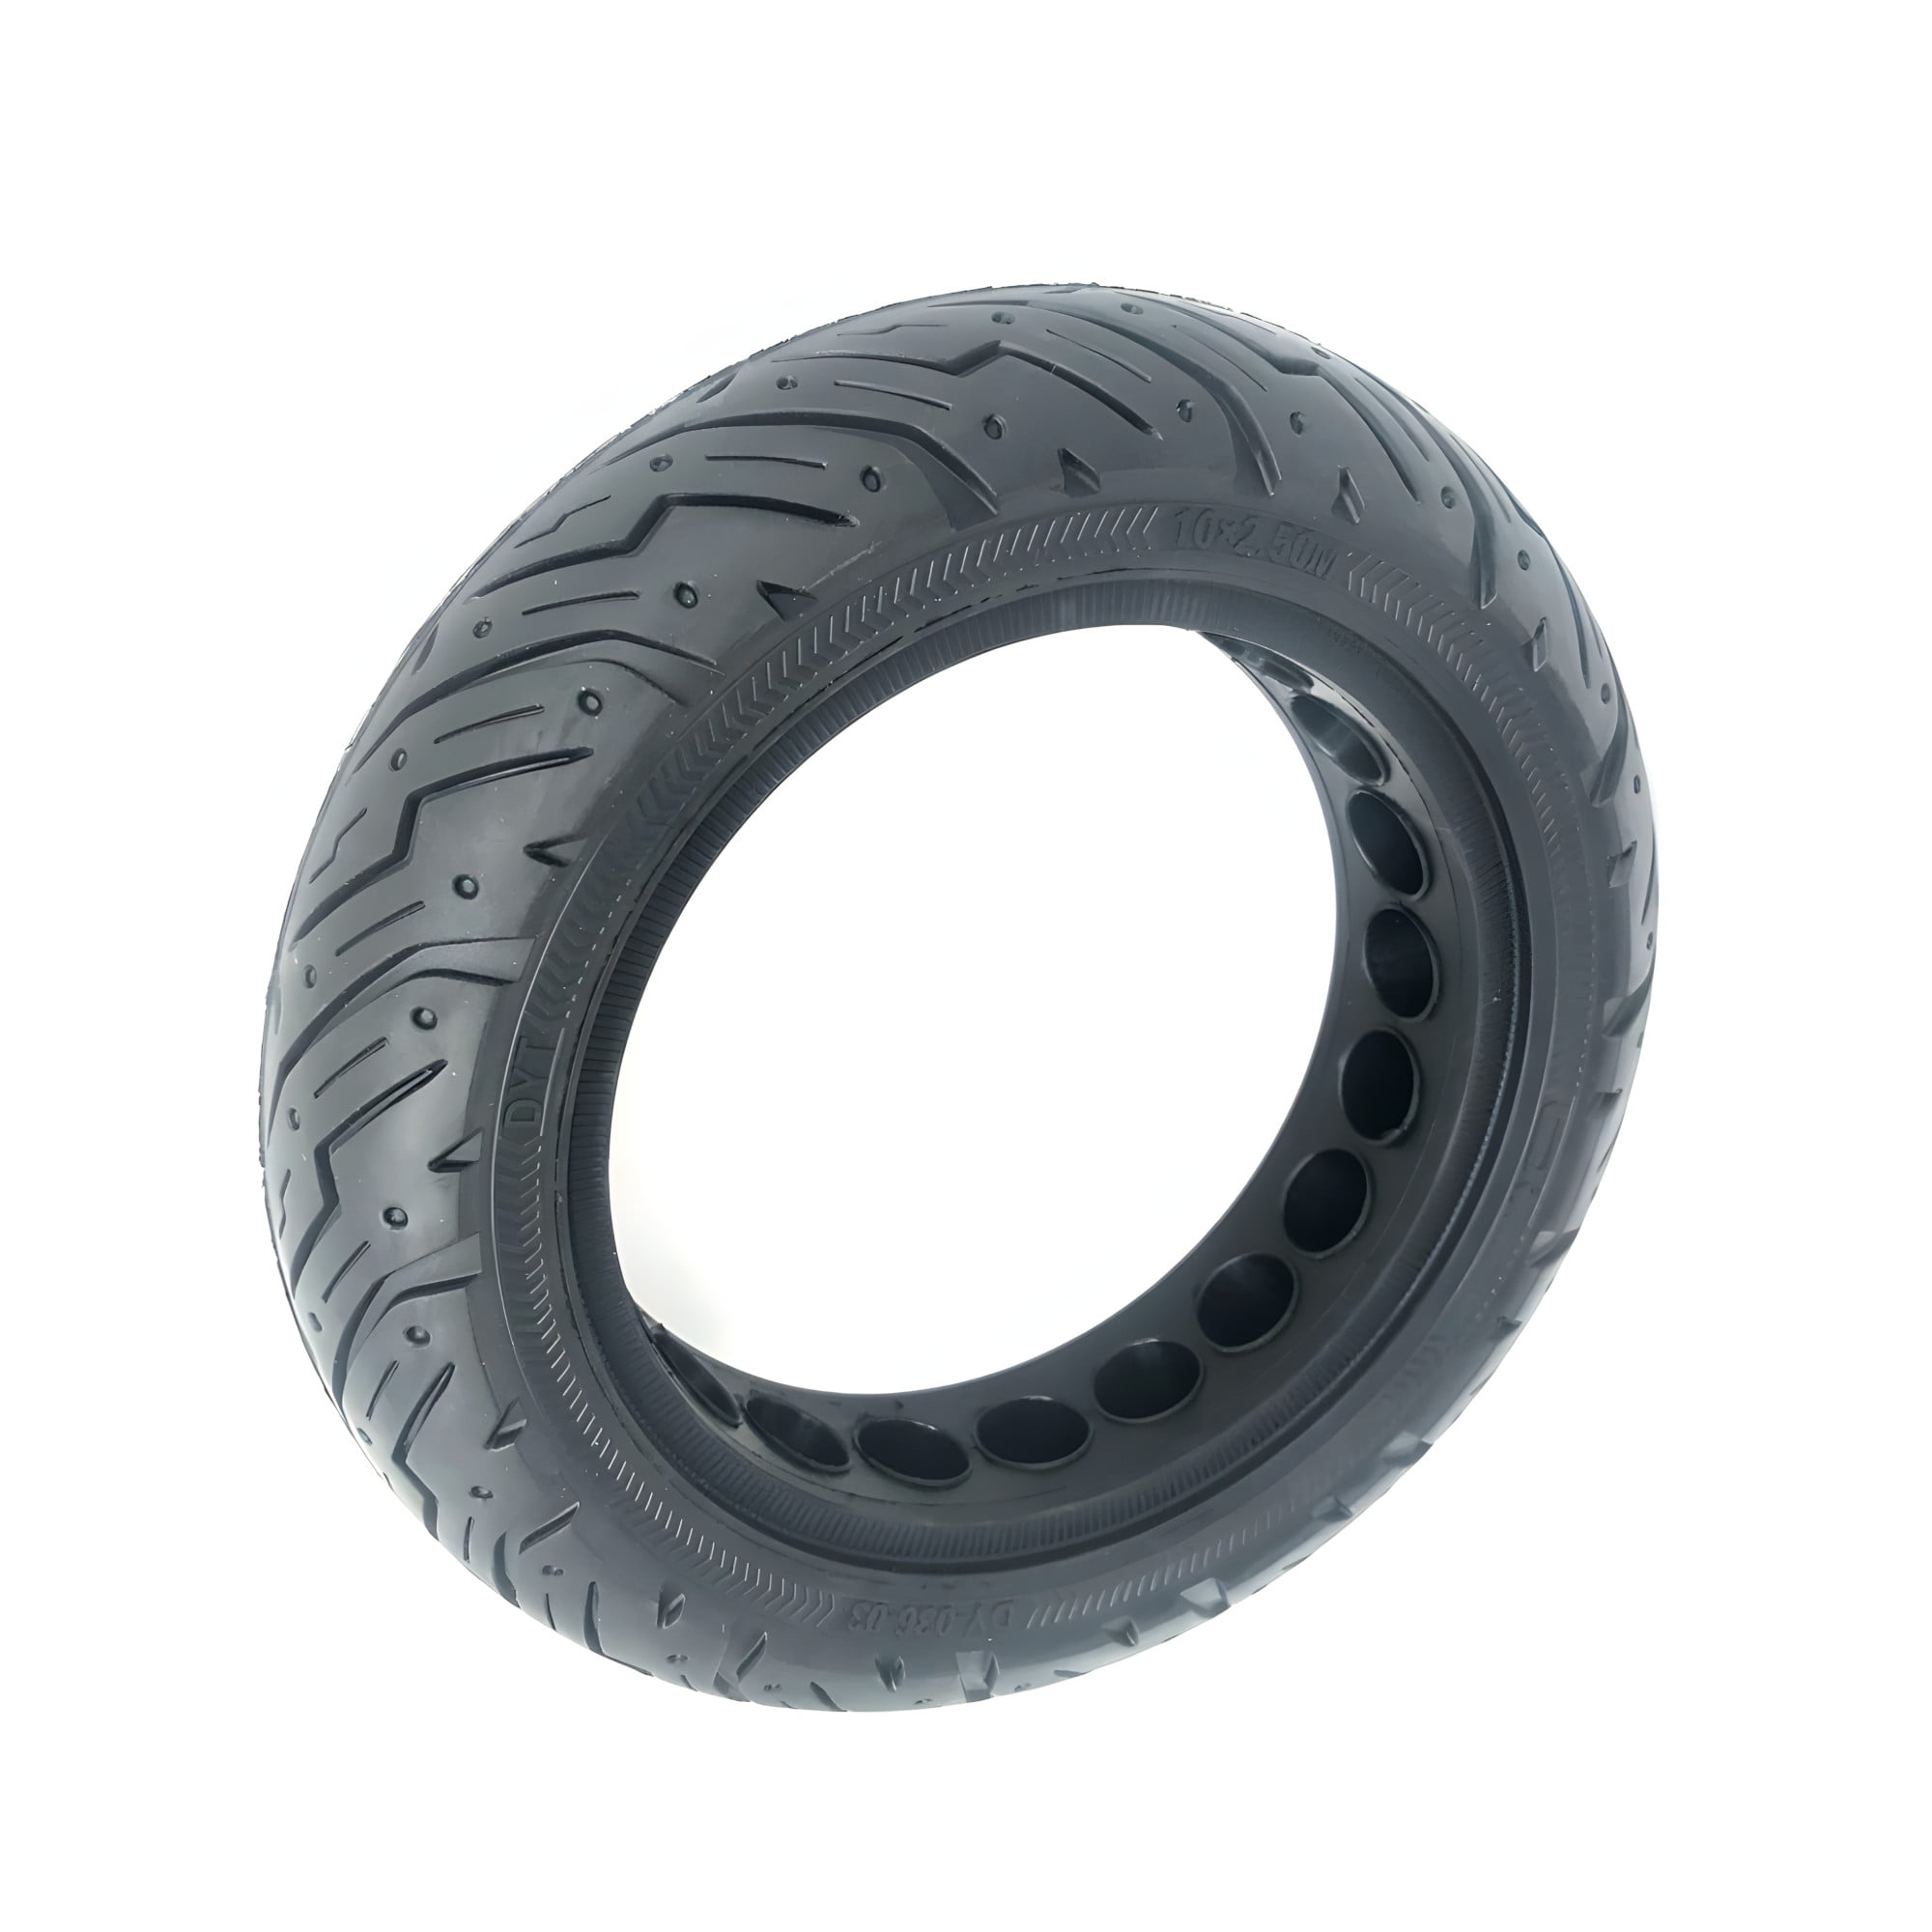 Solid road tyre for electric scooter 10″, 10×2.5